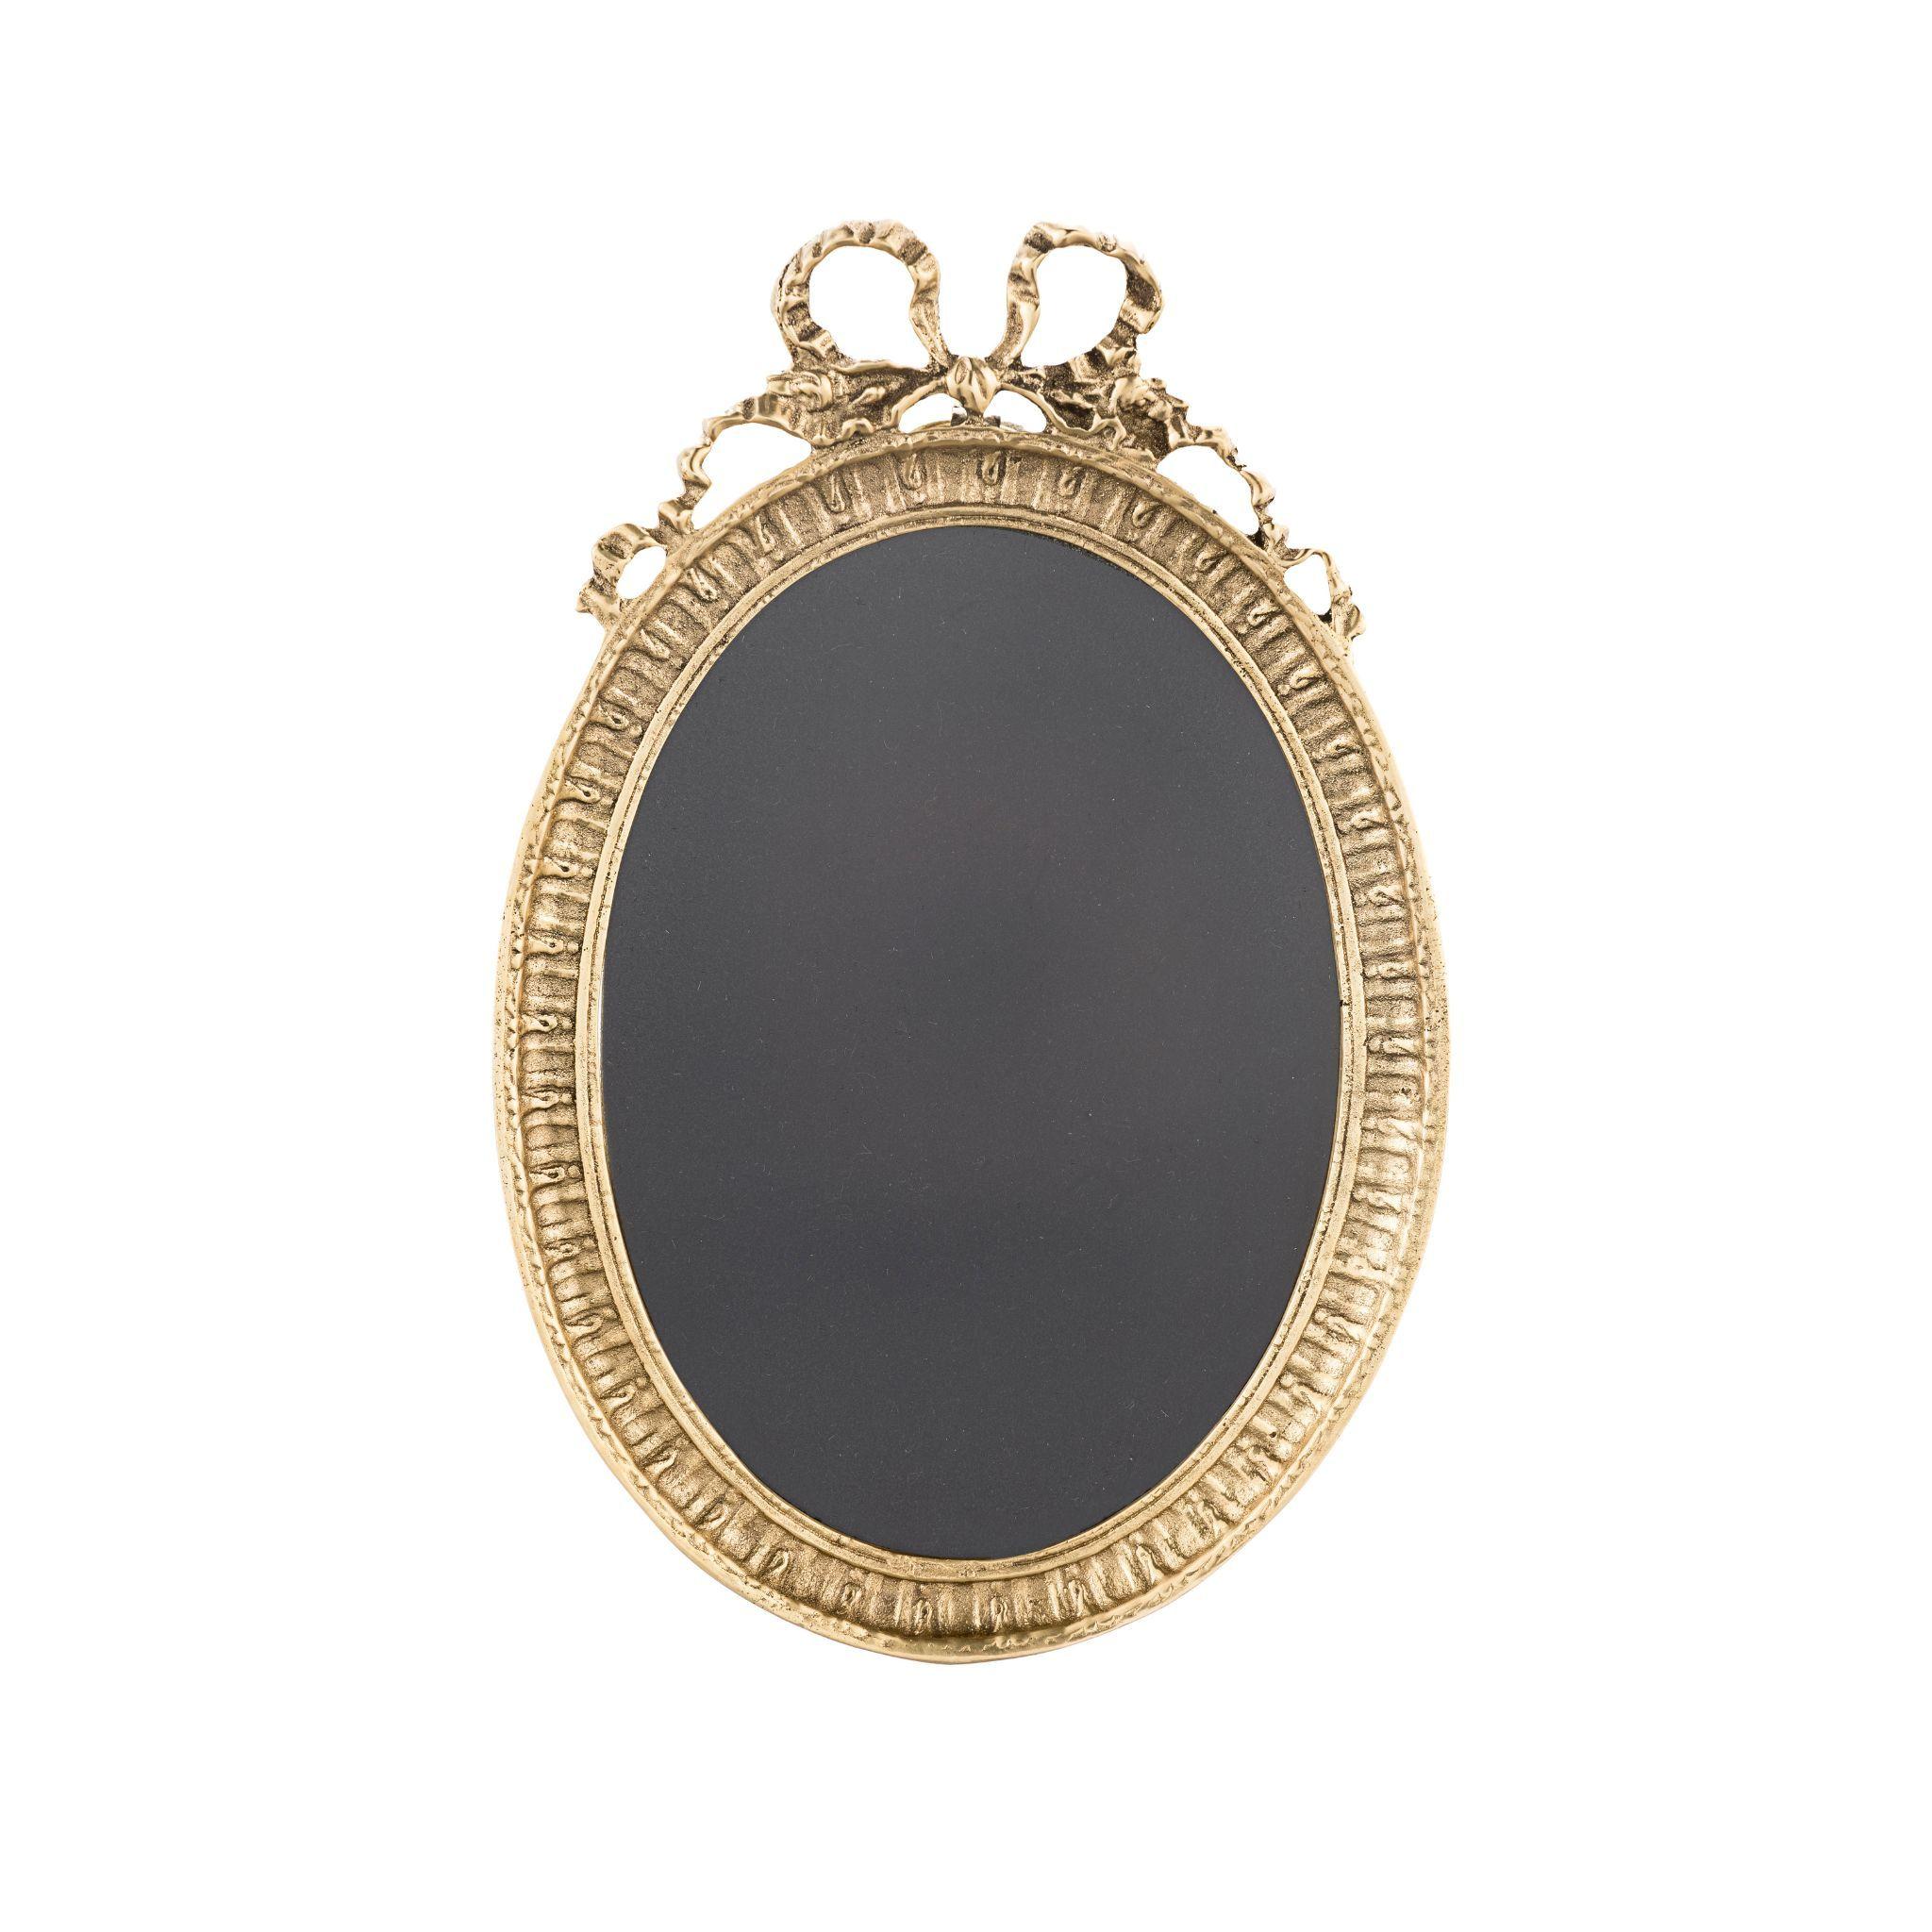 Add a touch of elegance to your decor with our Sissi round brass frame. This classic and timeless piece features a stunning design with intricate details, perfect for showcasing your favorite memories. Made from high-quality brass, it's both durable